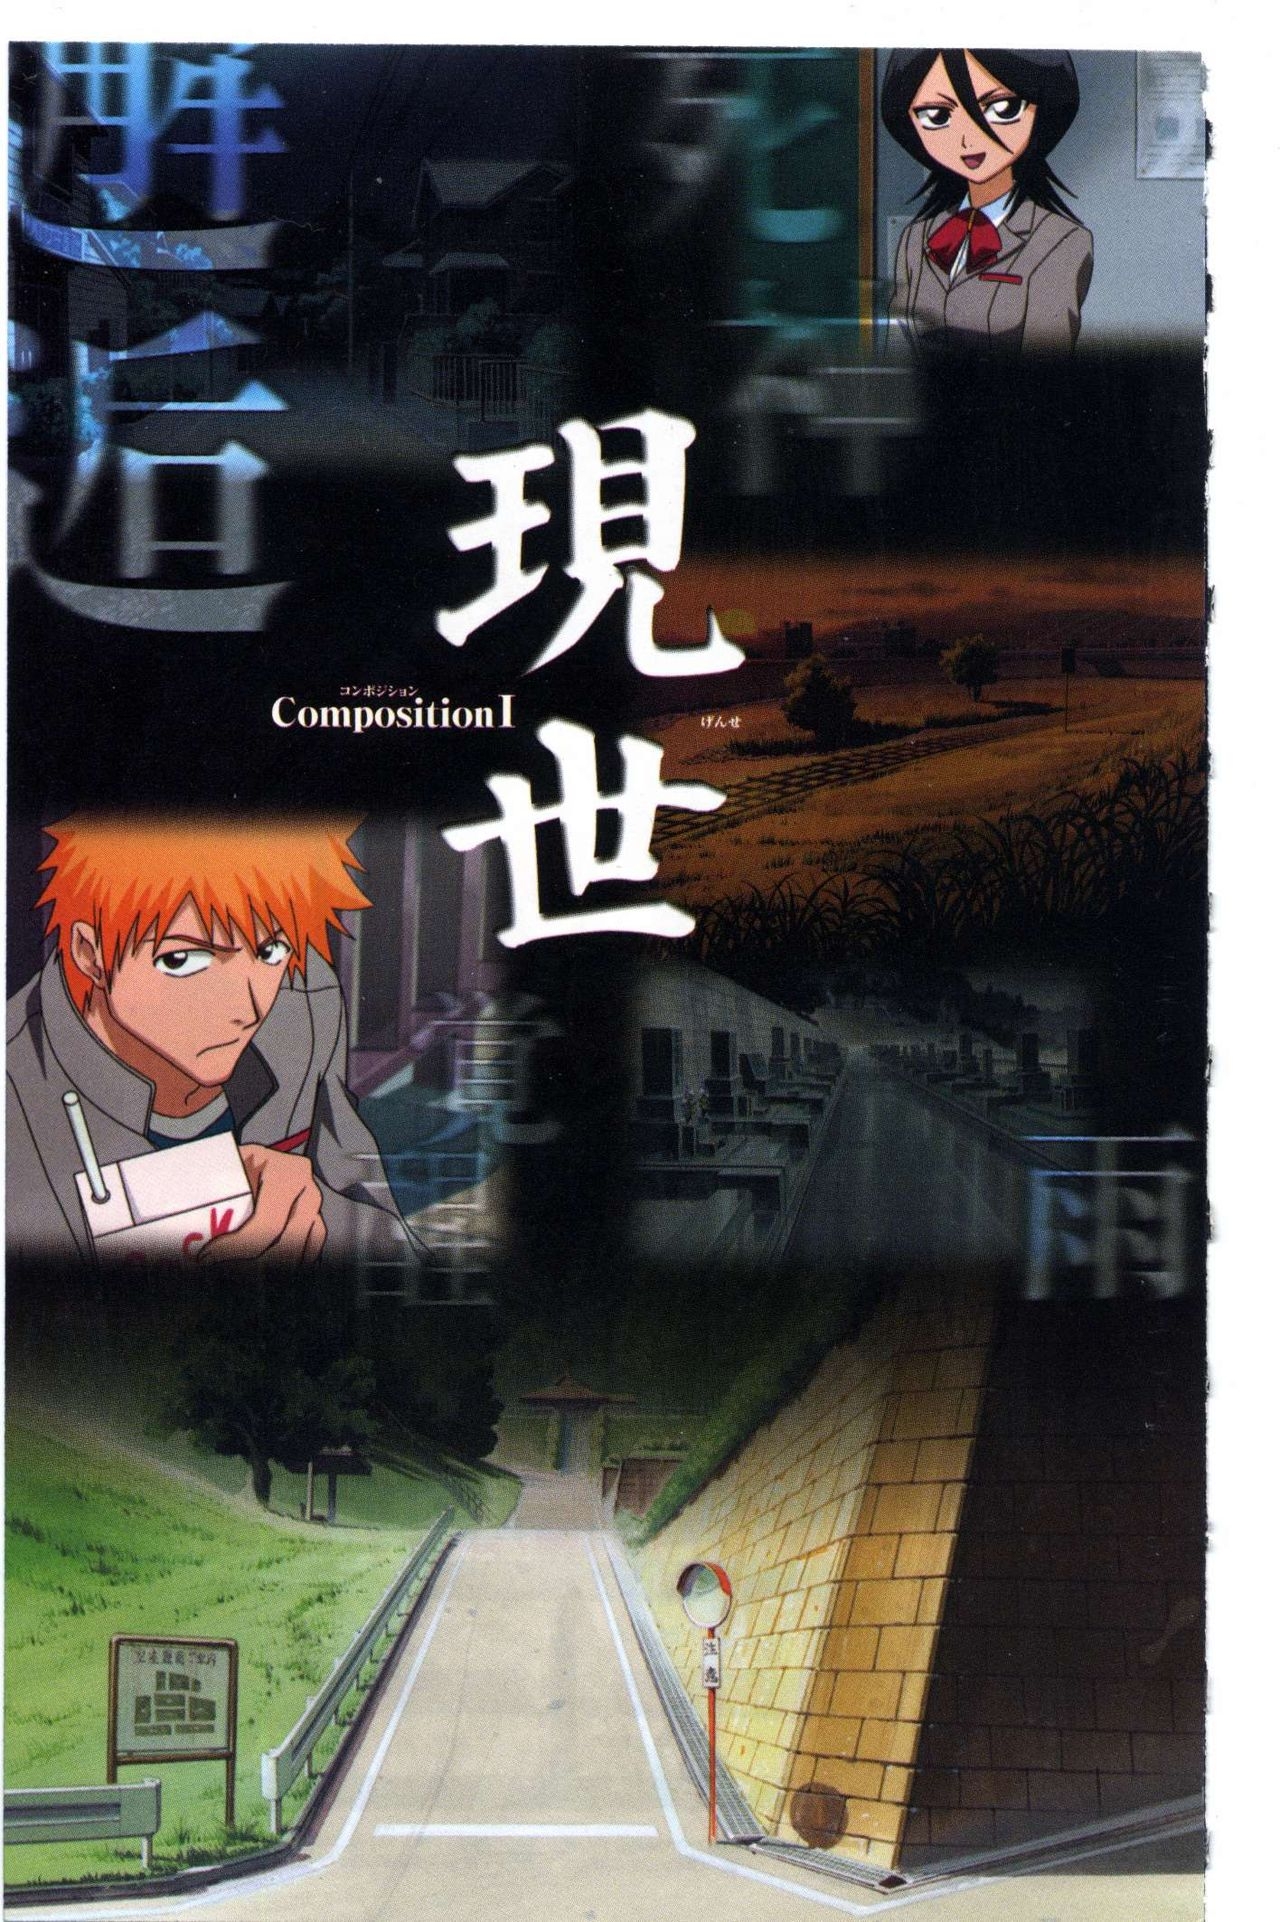 Bleach: Official Animation Book VIBEs 19